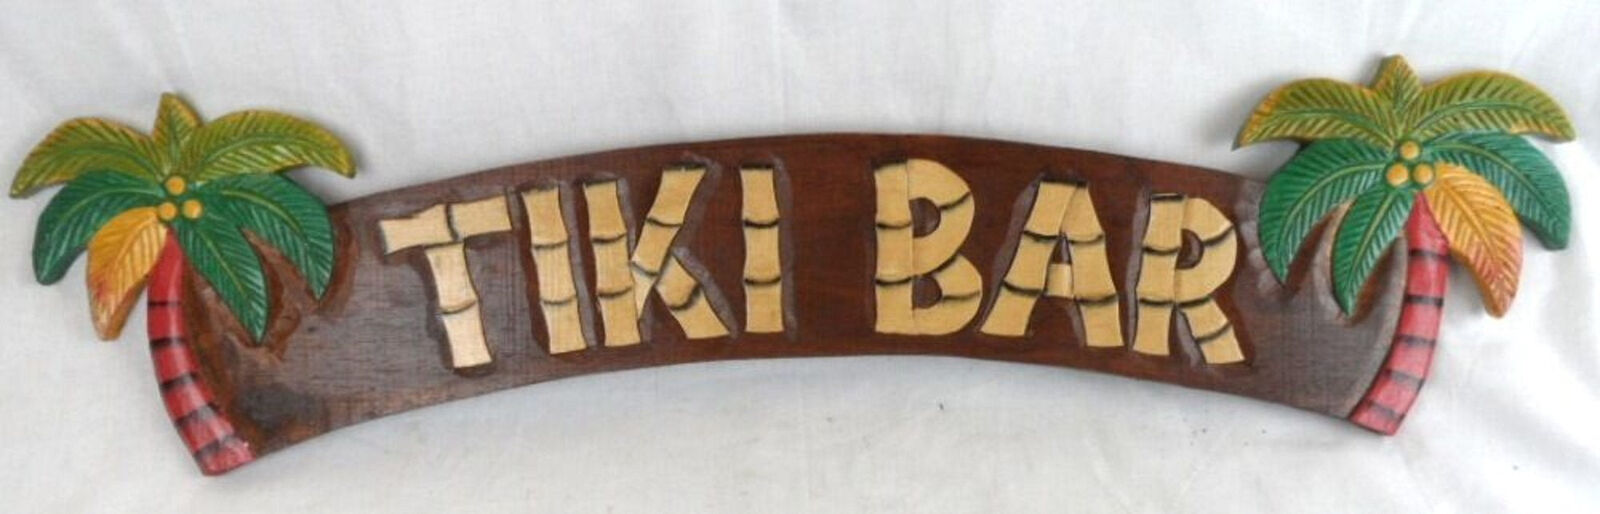 Tiki Bar Sign Hand Crafted And Painted Tiki Bar Decorations Hanging Wall Signs T